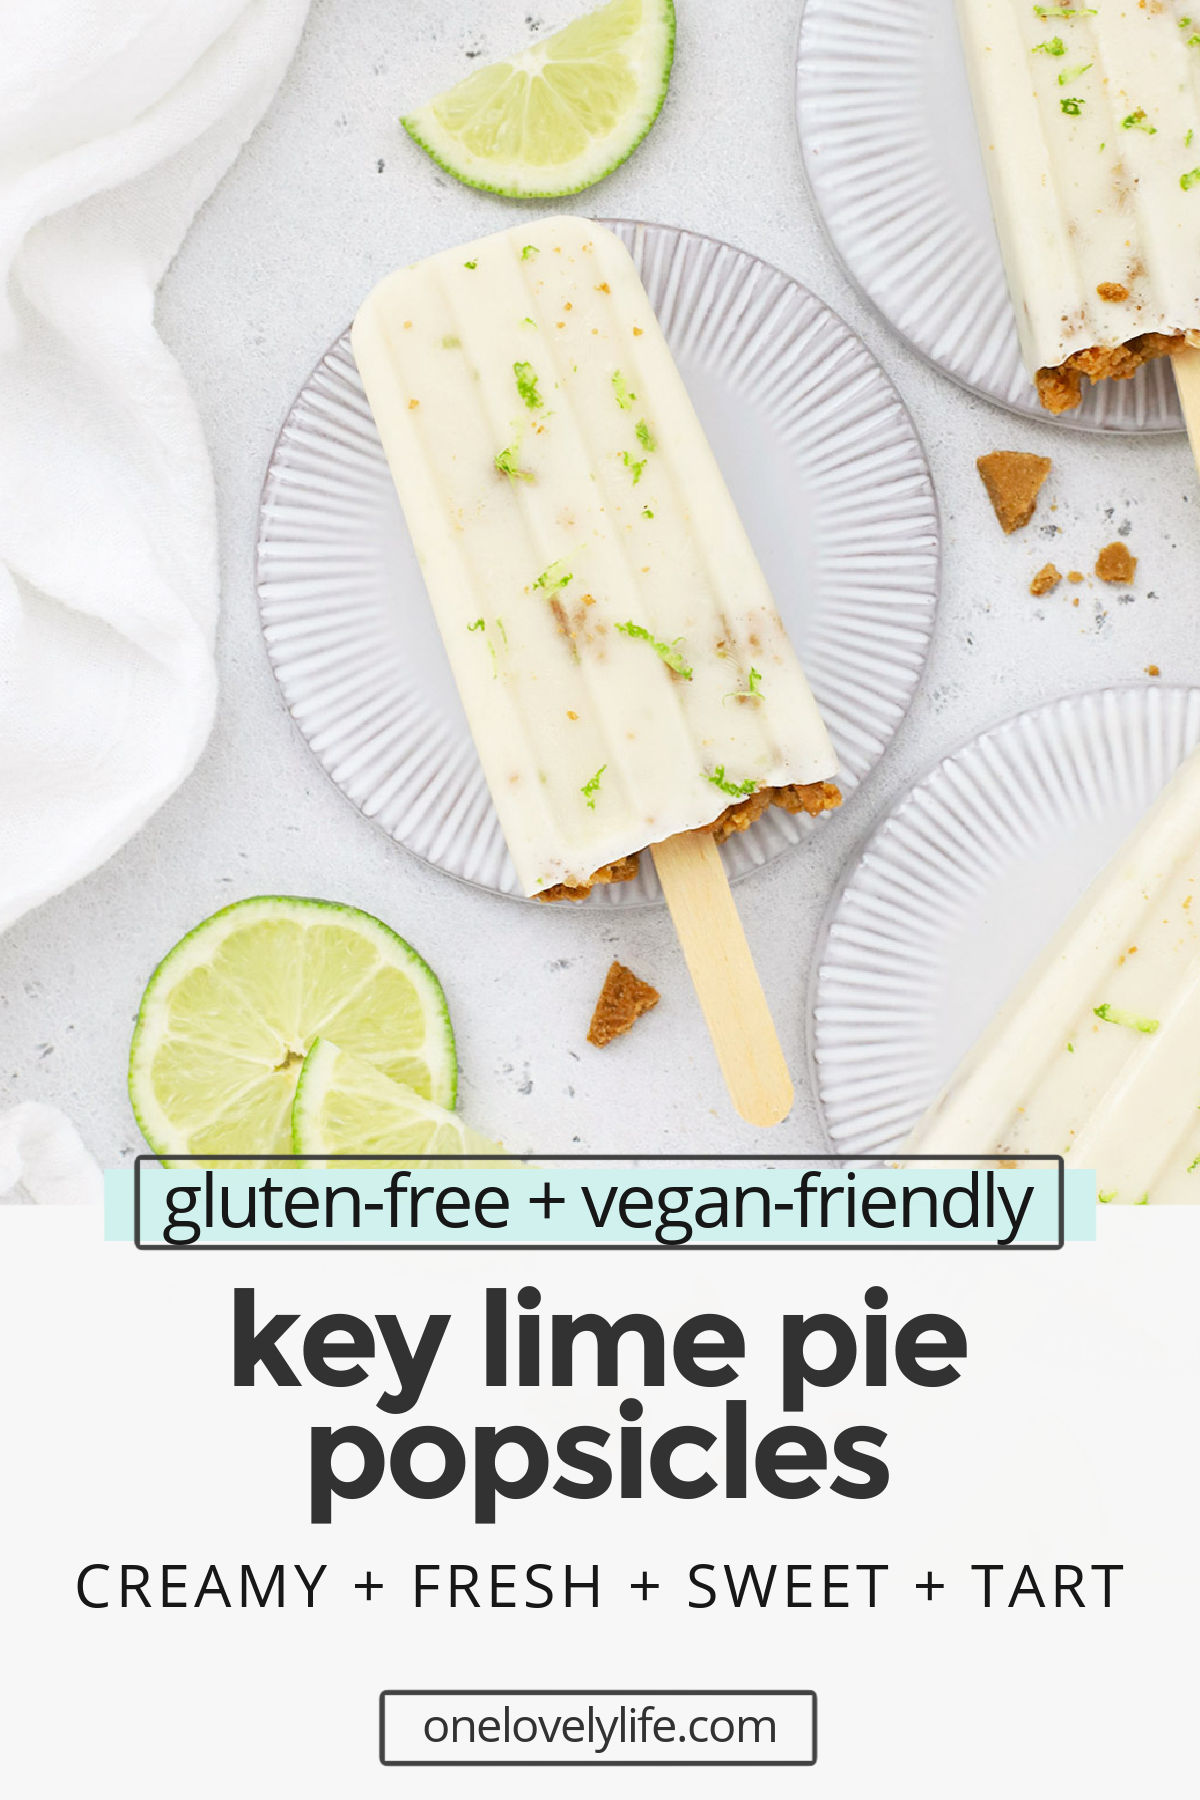 Key Lime Pie Popsicles - These creamy lime popsicles taste like a slice of key lime pie! A perfect summer treat! (Gluten-Free, Vegan-Friendly) // key lime pie on a stick // vegan lime popsicles // healthy lime popsicles // key lime pie ice pop recipe